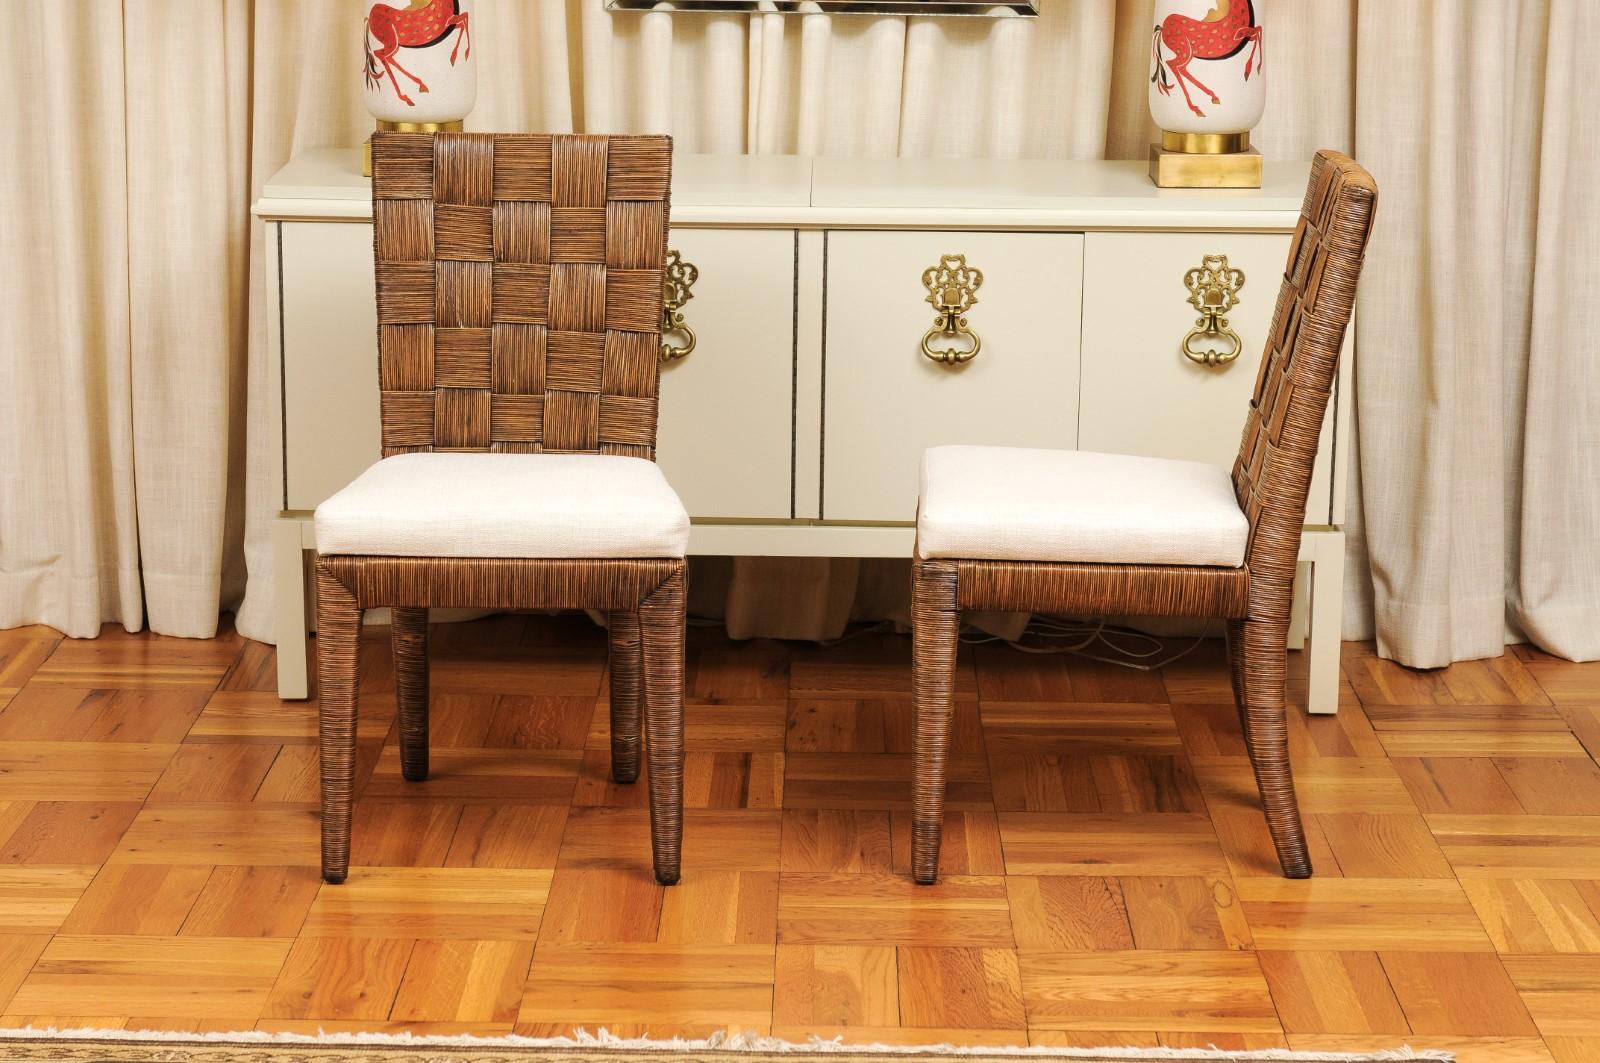 Stellar Set of 12 Vintage Block Island Cane Chairs by John Hutton for Donghia For Sale 9